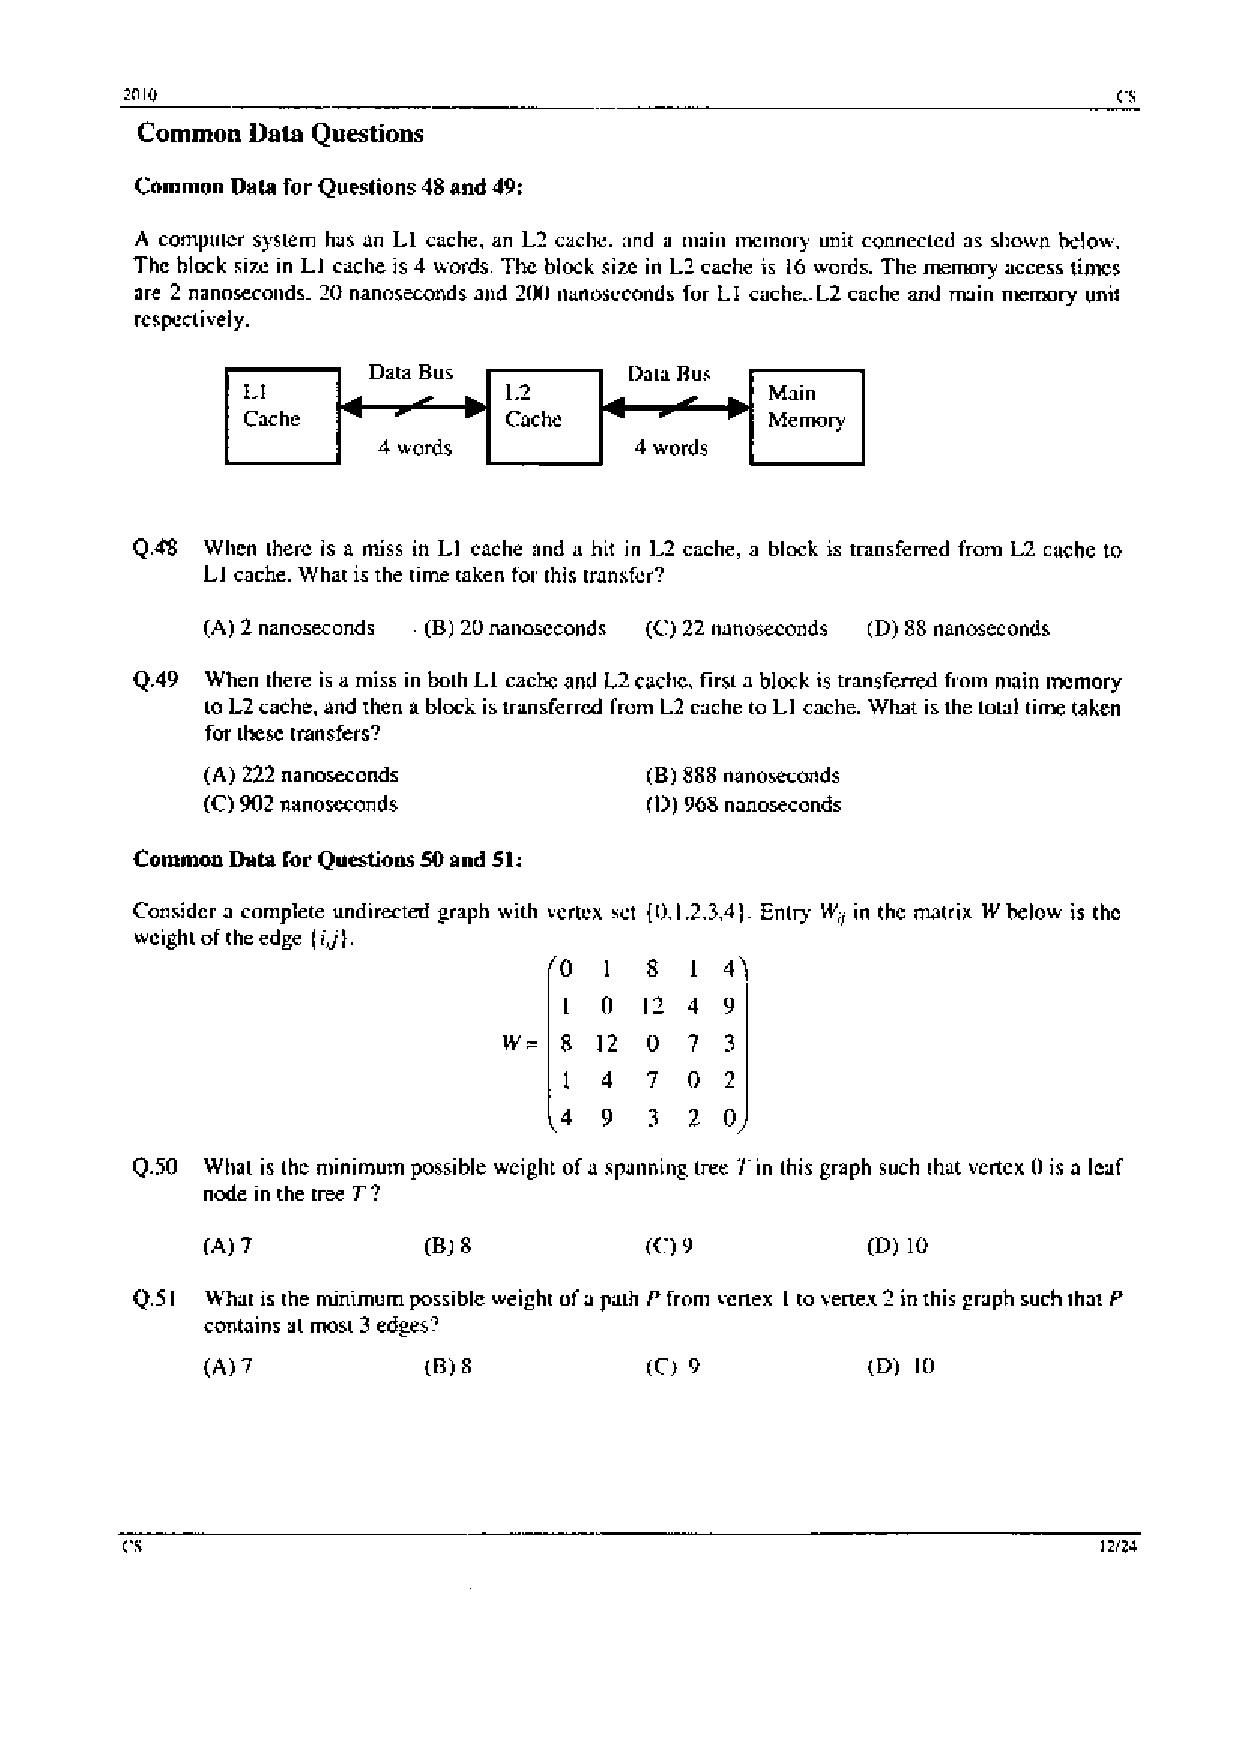 GATE Exam Question Paper 2010 Computer Science and Information Technology 12